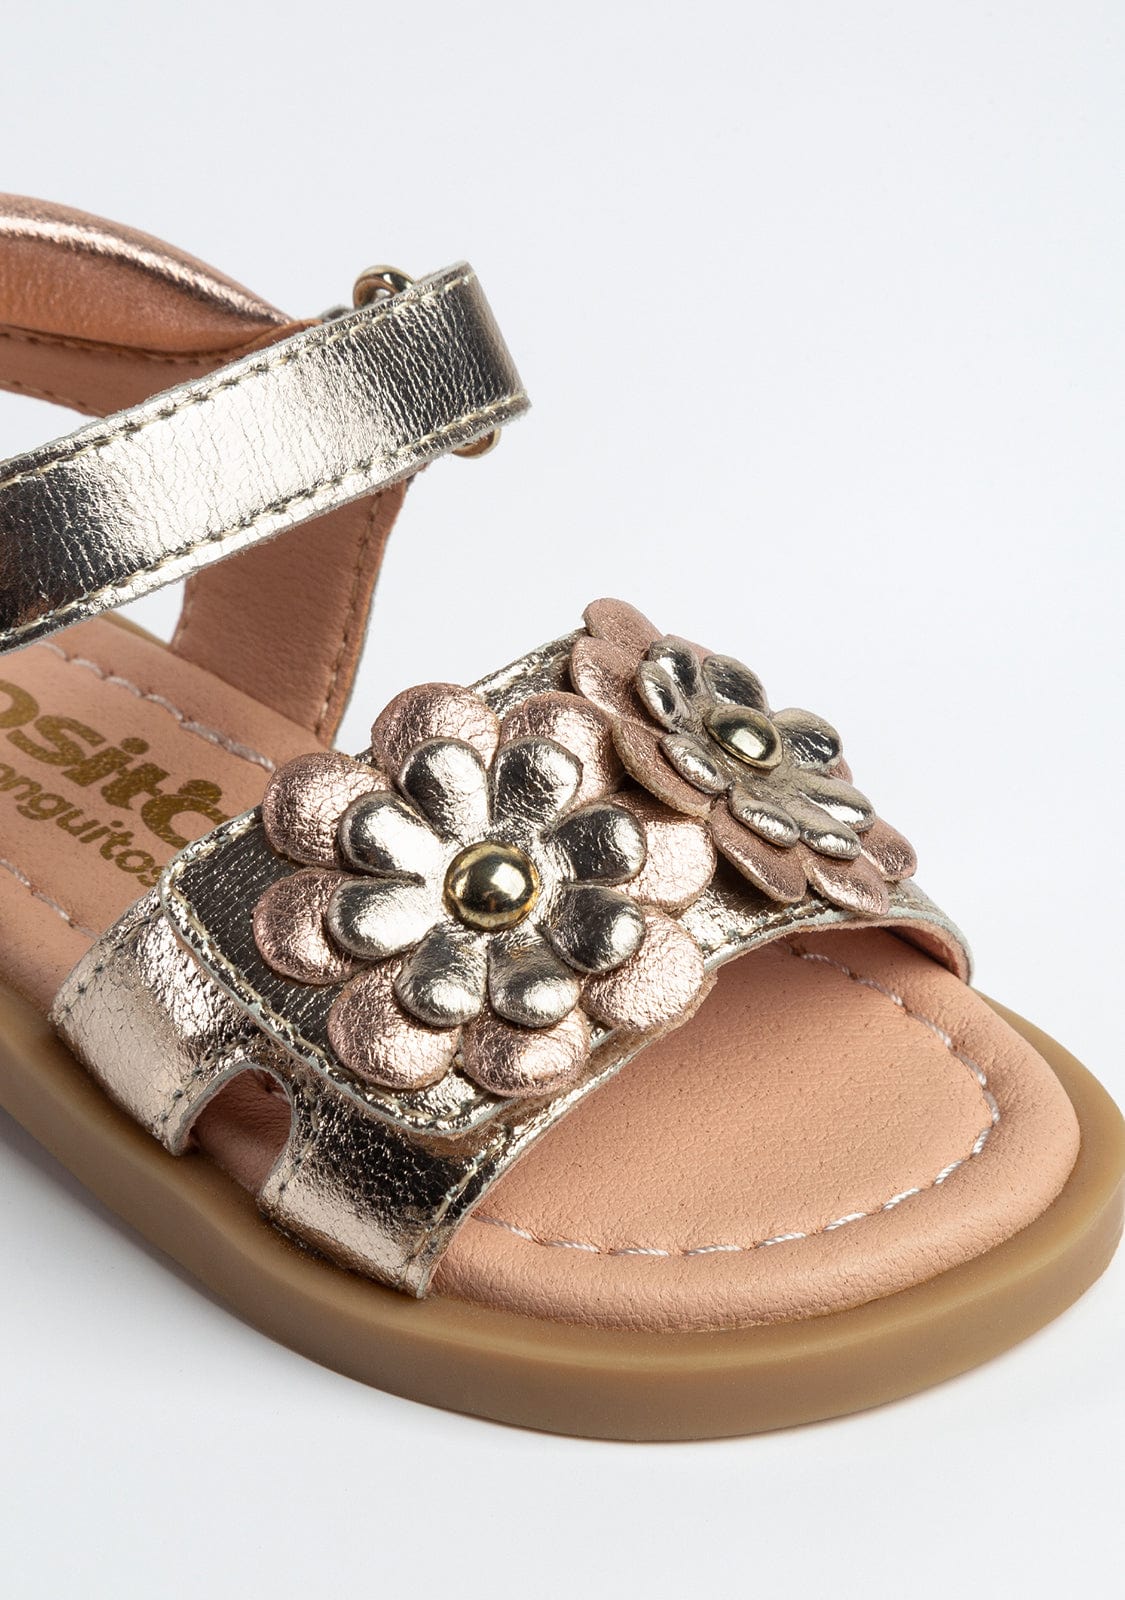 OSITO Shoes Baby's Flowers Metallic Leather Sandals